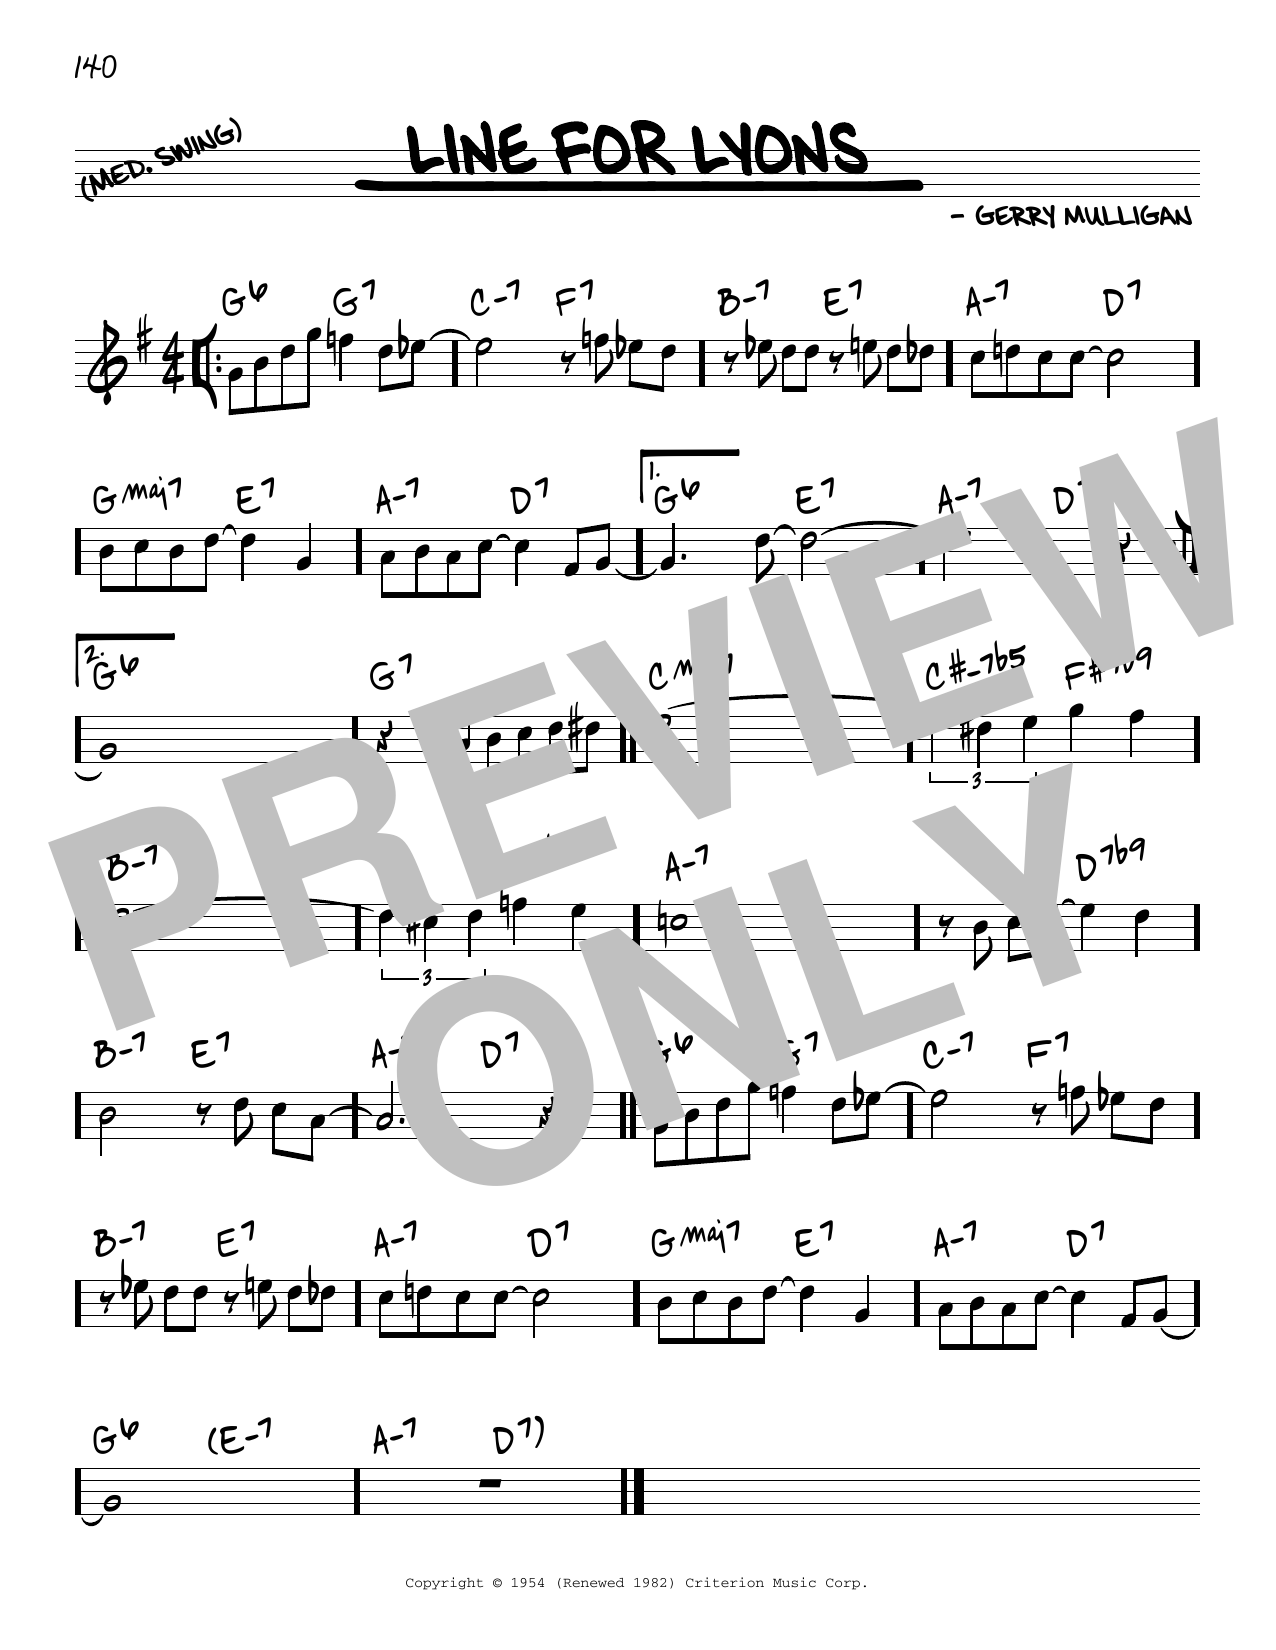 Download Gerry Mulligan Line For Lyons Sheet Music